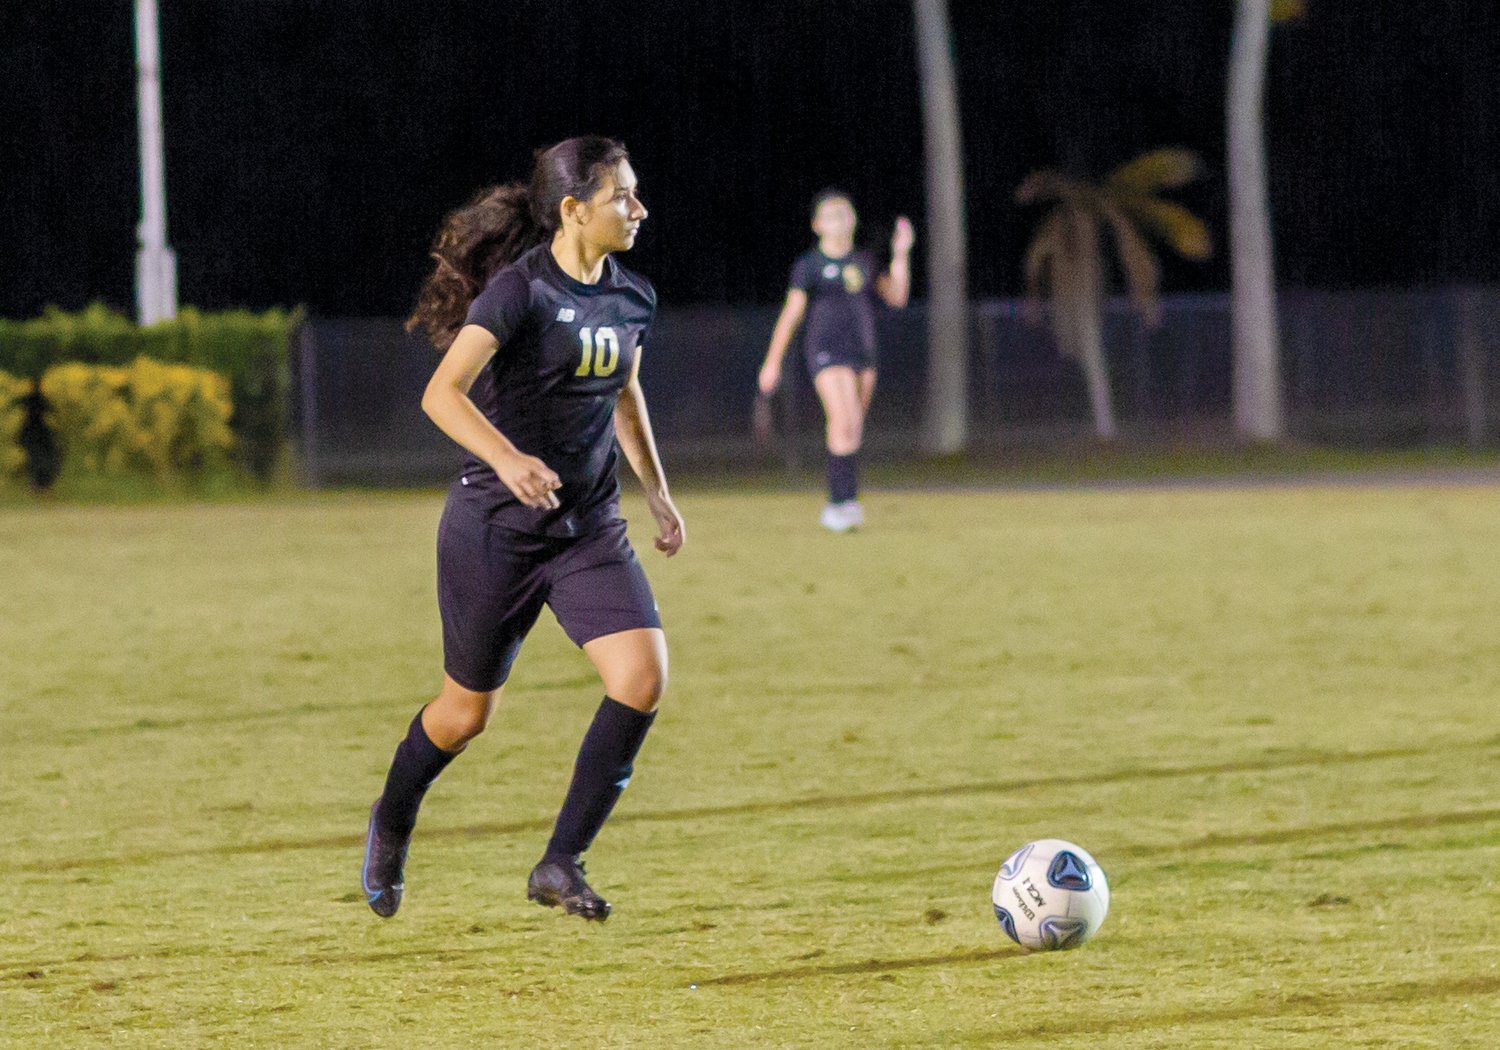 OHS senior Isabella Saucedo has played a key role in the last three victories for Okeechobee, leading the team in scoring against Clewiston, Port St. Lucie, and Westwood.